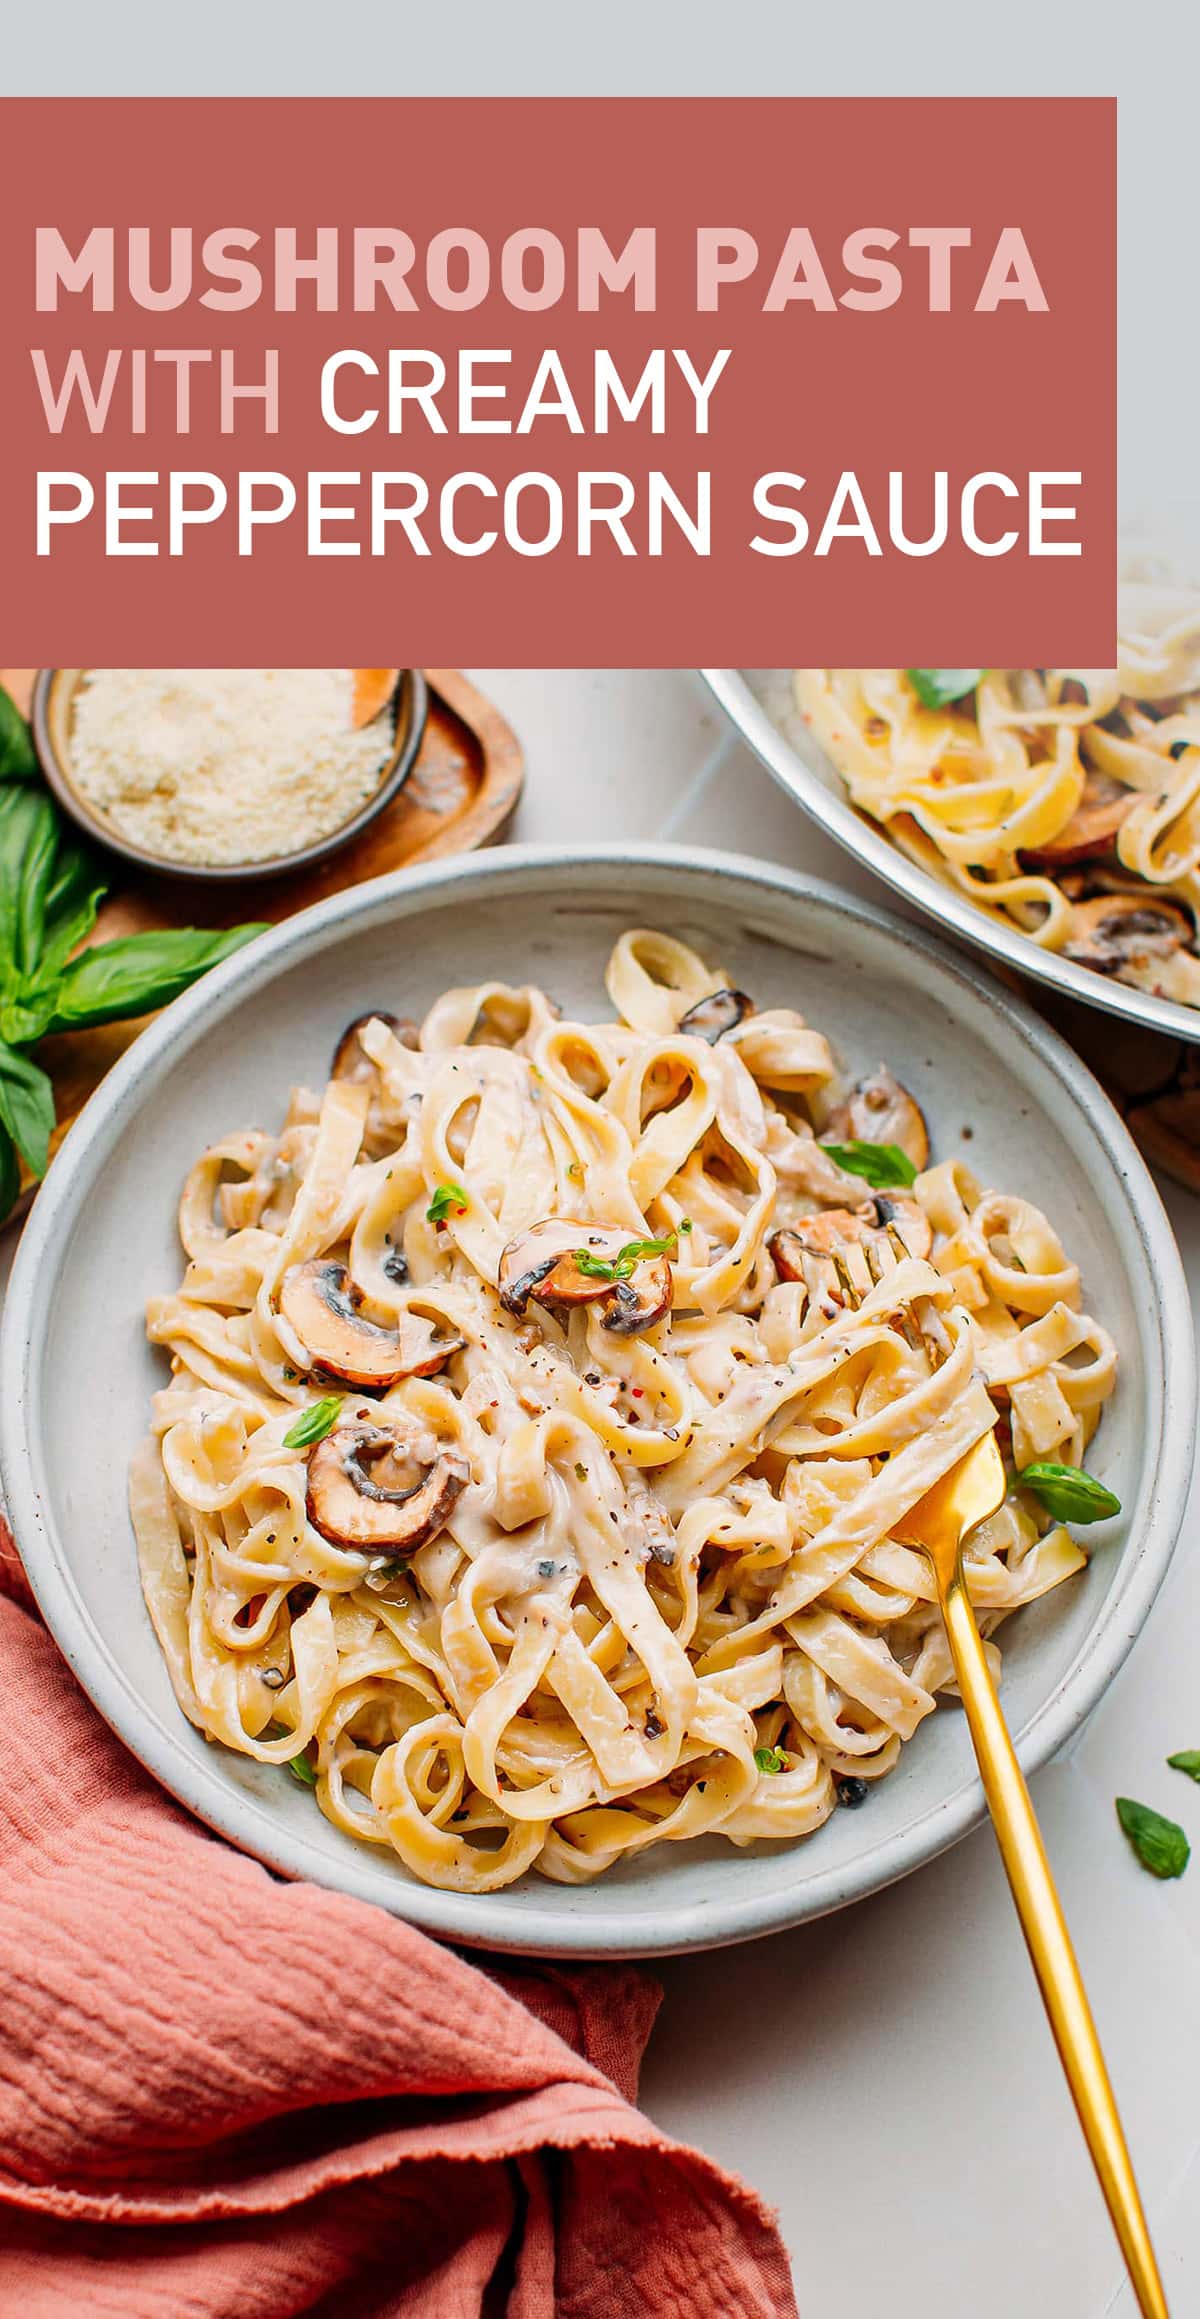 This fettuccine pasta is served in a rich and creamy peppercorn sauce with sautéed mushrooms and fresh basil. A delicious plant-based dinner that is easy to make and requires minimal ingredients! #peppercornsauce #pasta #vegan